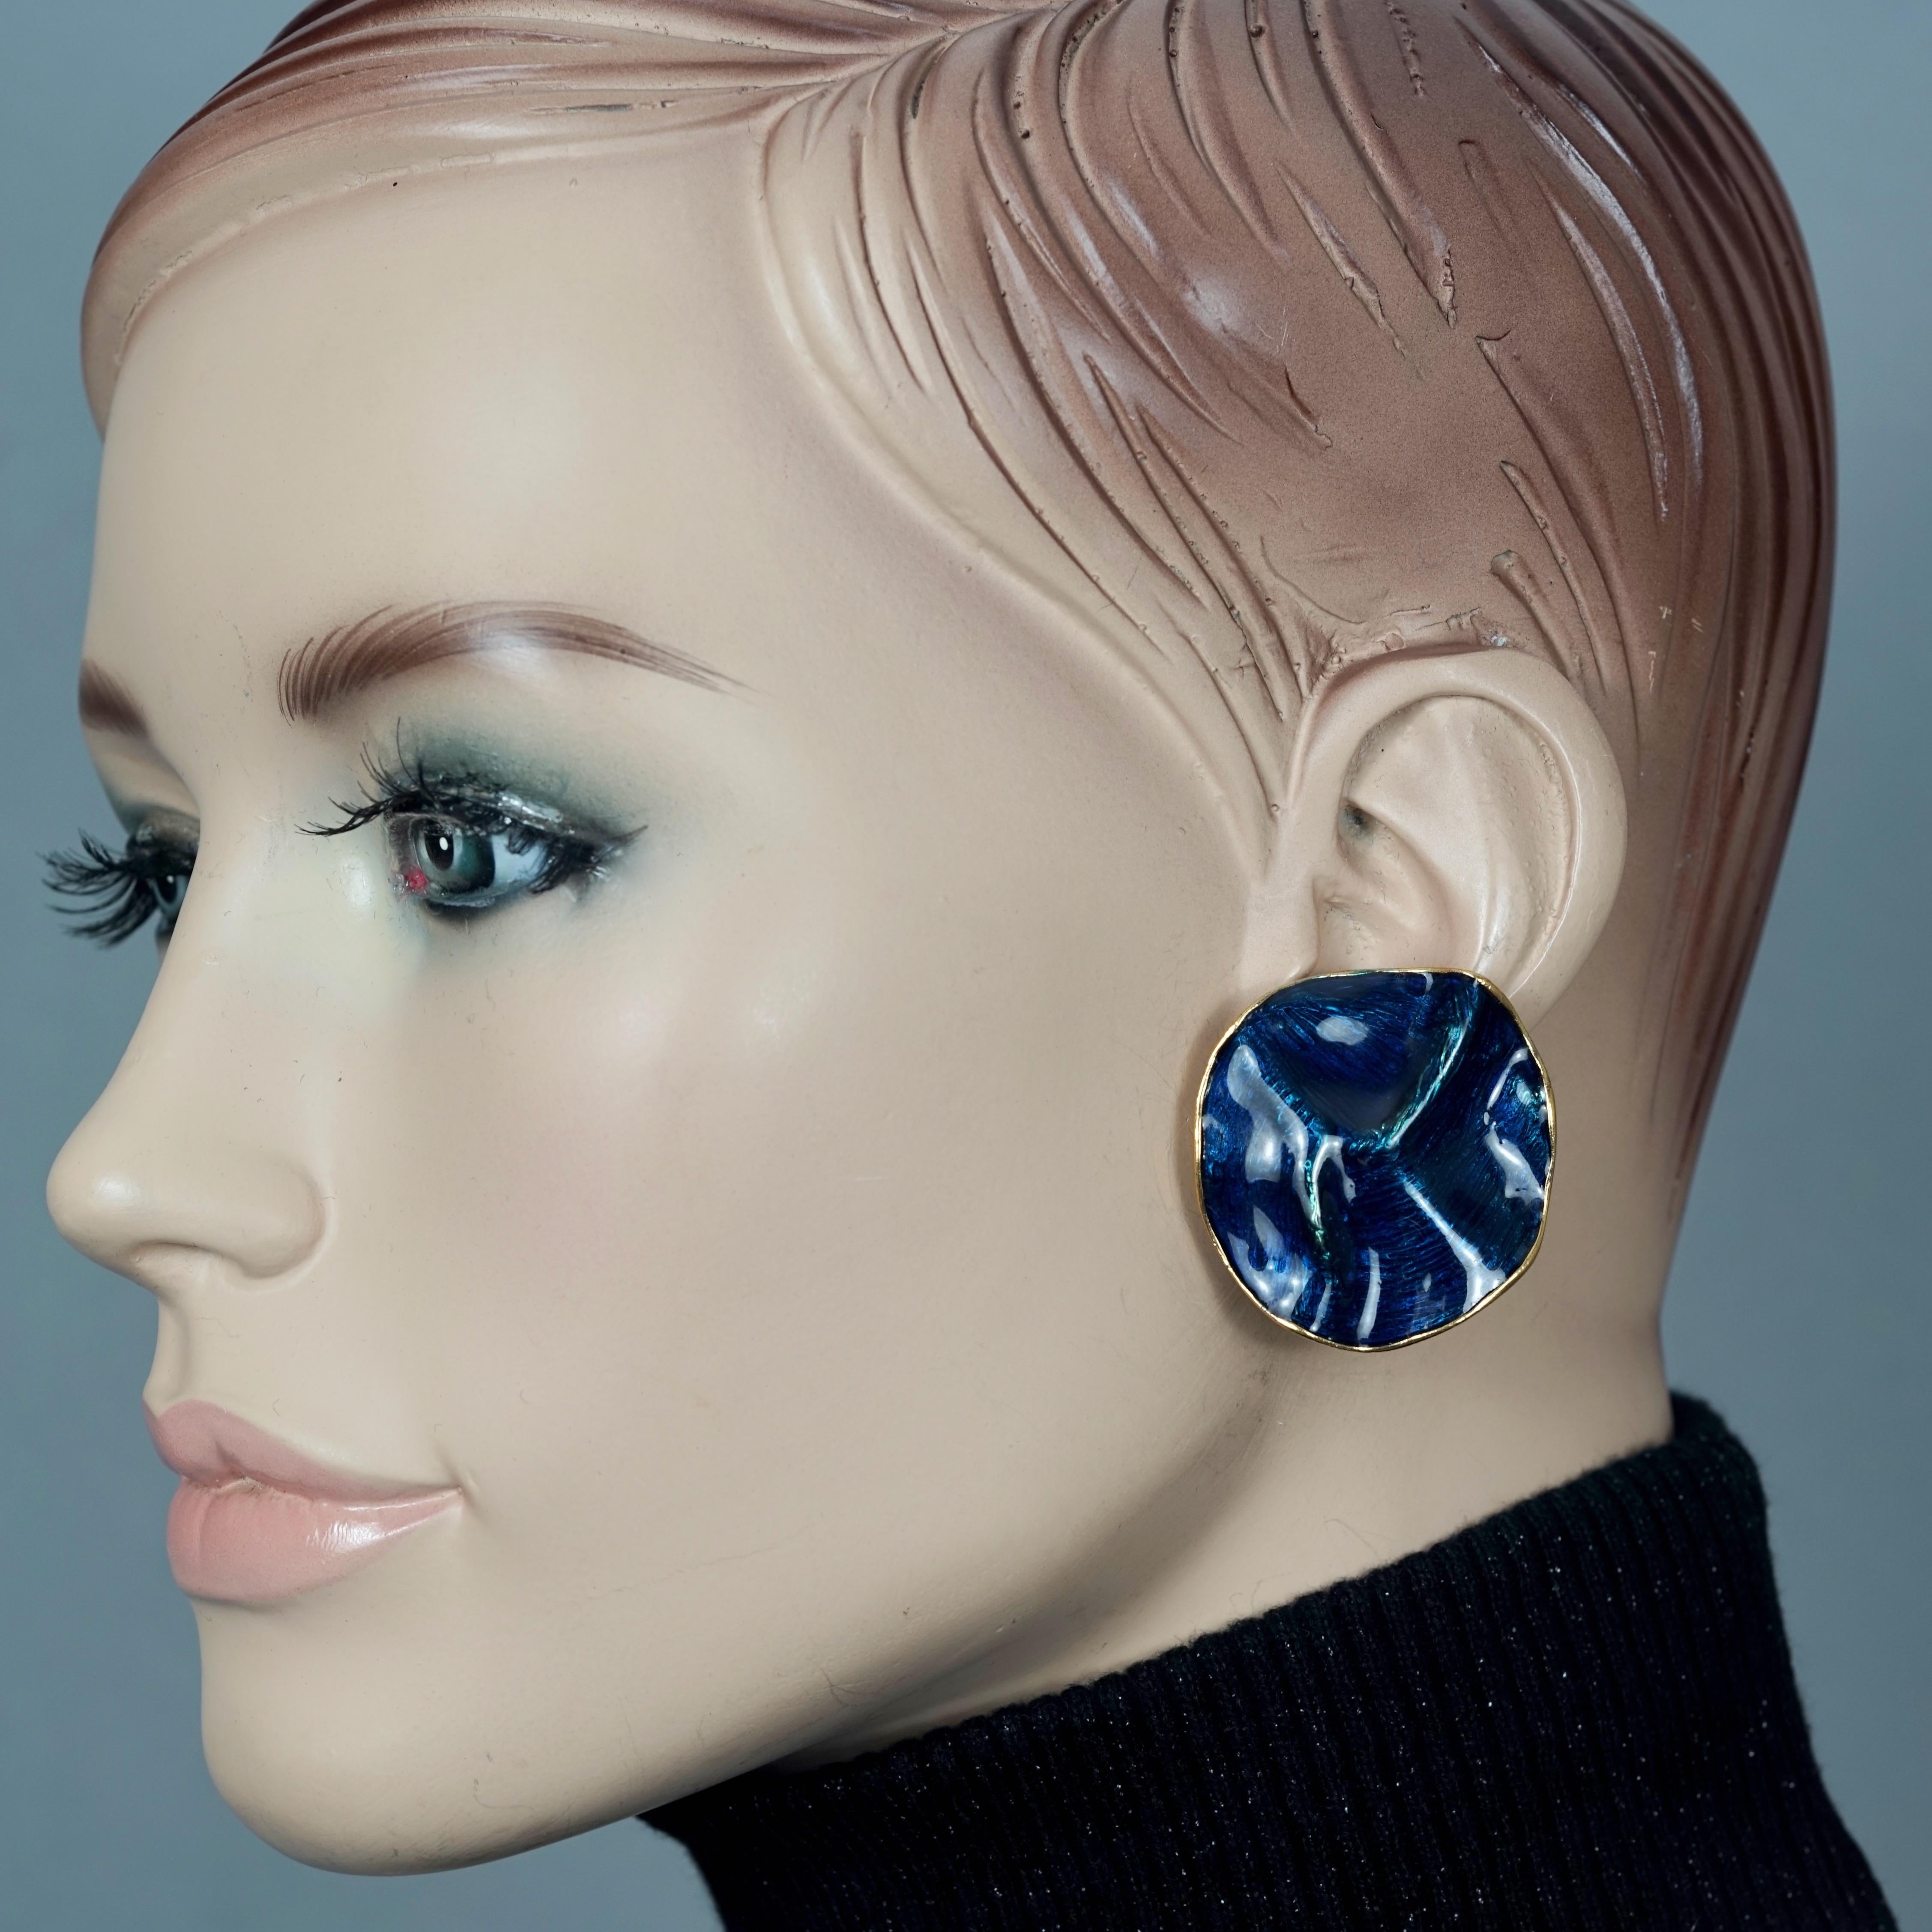 Vintage YVES SAINT LAURENT Ysl by Robert Goossens Wrinkled Blue Enamel Disc Earrings

Measurements:
Height: 1.41 inches (3.6 cm)
Width: 1.50 inches (3.8 cm)
Weight per Earring: 17 grams

Features:
- 100% Authentic YVES SAINT LAURENT by Robert